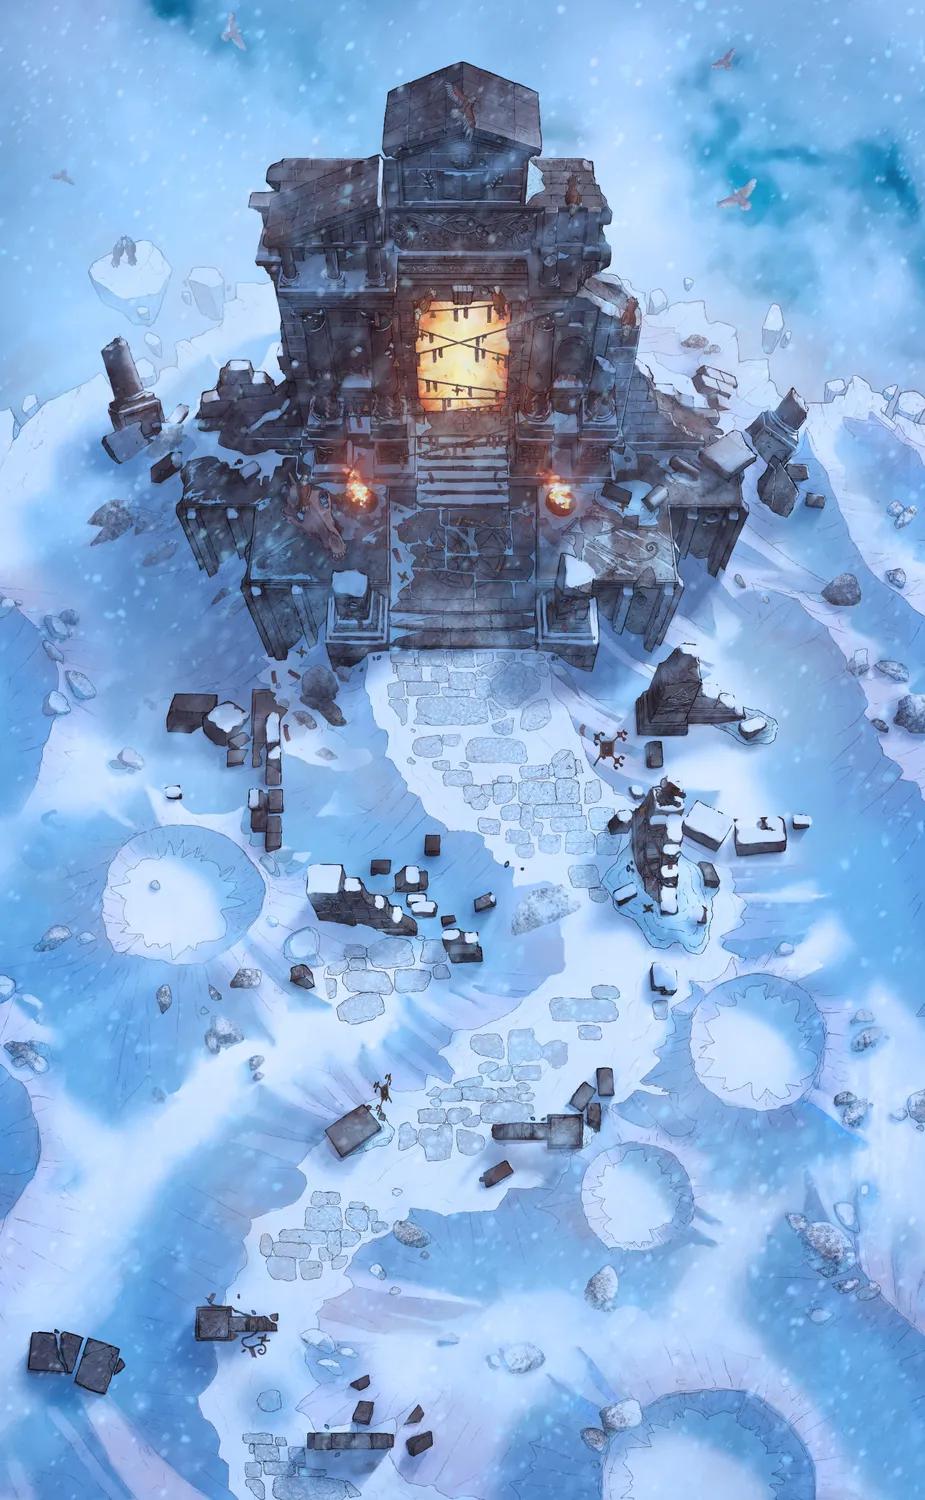 Wizard Prison Pt. 1 map, Winter Day variant